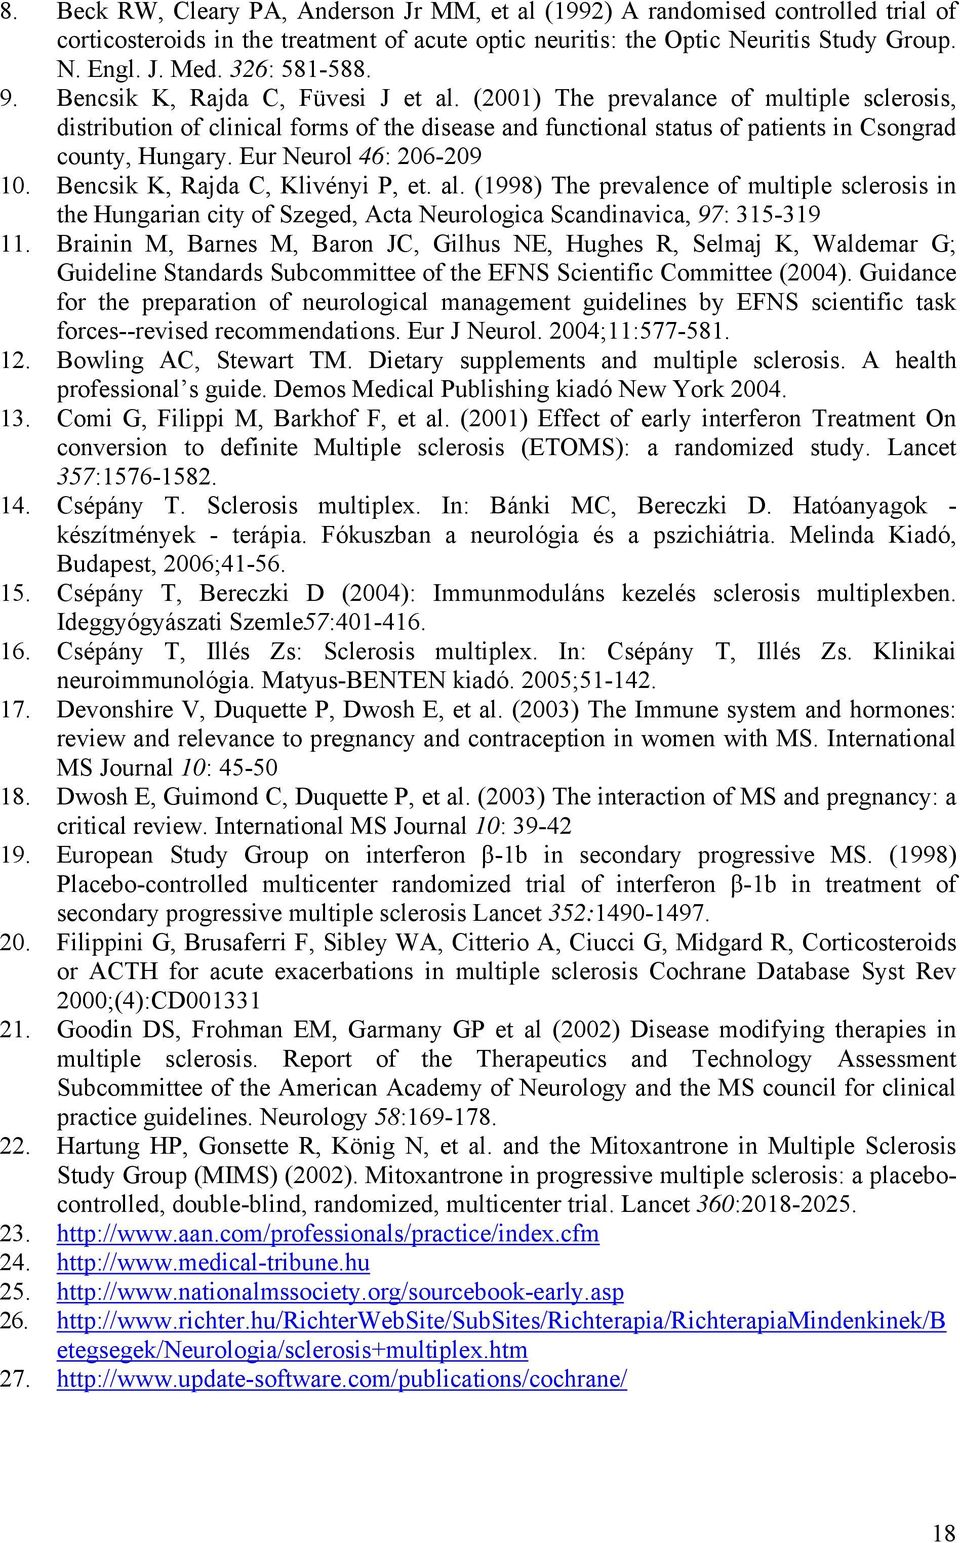 (2001) The prevalance of multiple sclerosis, distribution of clinical forms of the disease and functional status of patients in Csongrad county, Hungary. Eur Neurol 46: 206-209 10.